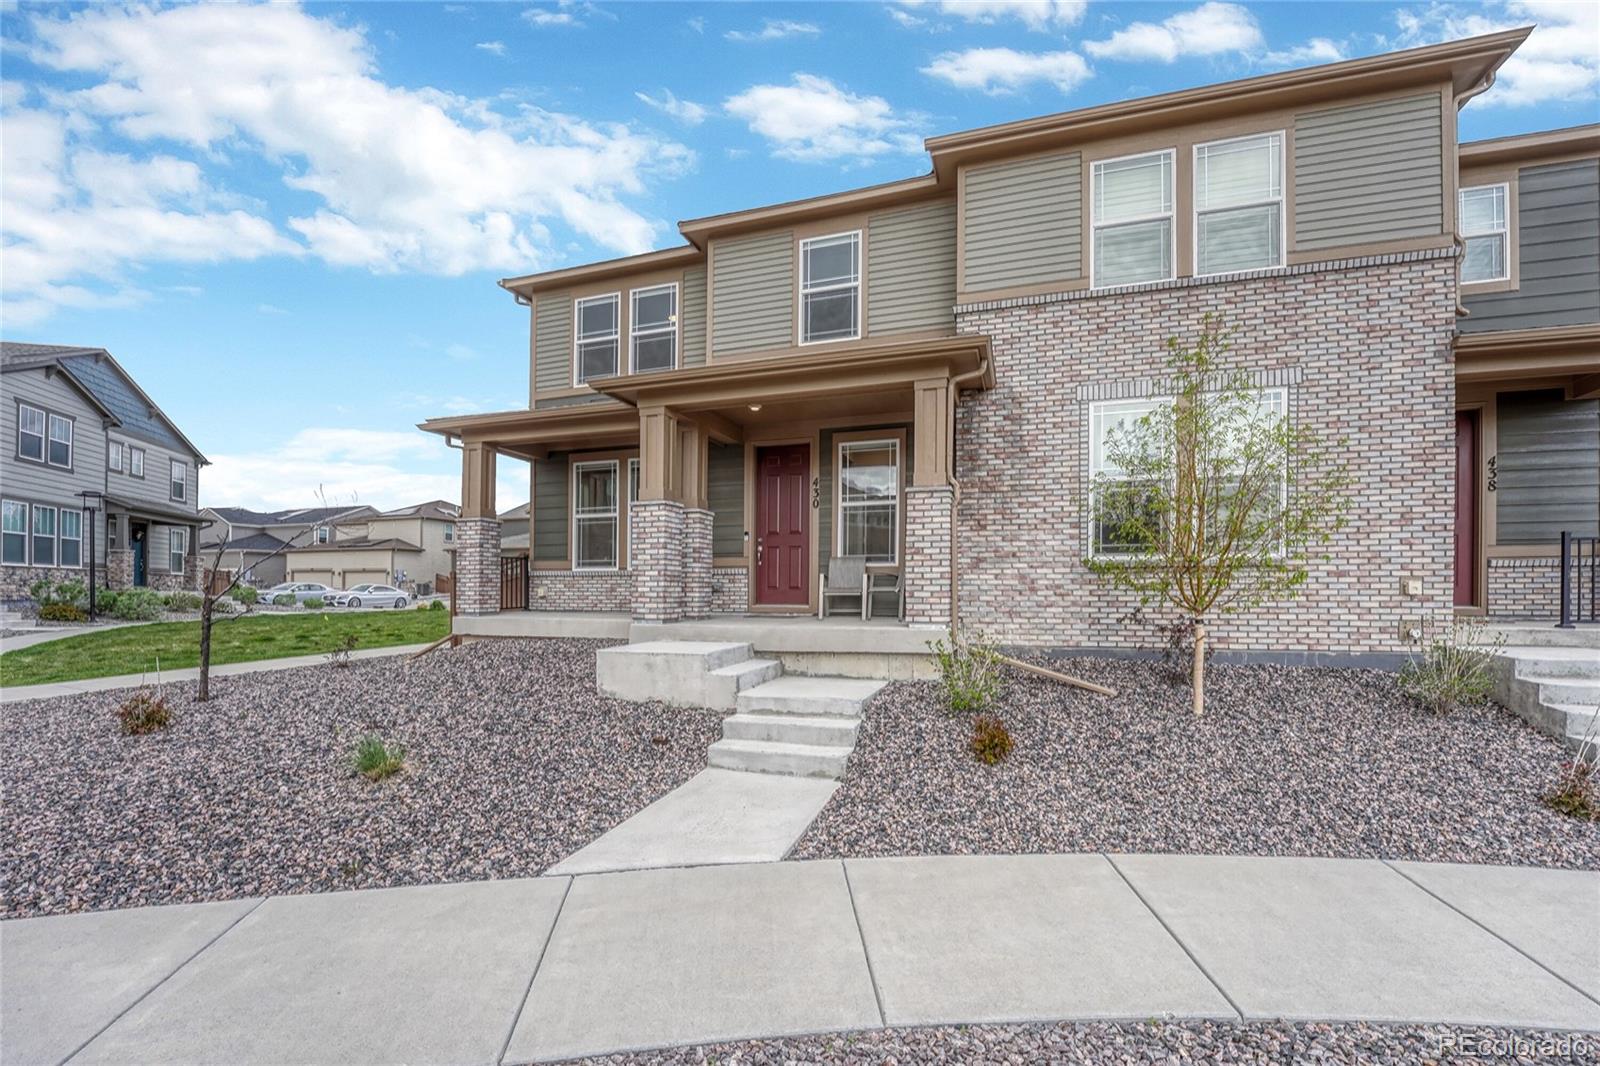 430  Courtfield Way, castle pines MLS: 6706370 Beds: 3 Baths: 3 Price: $615,000